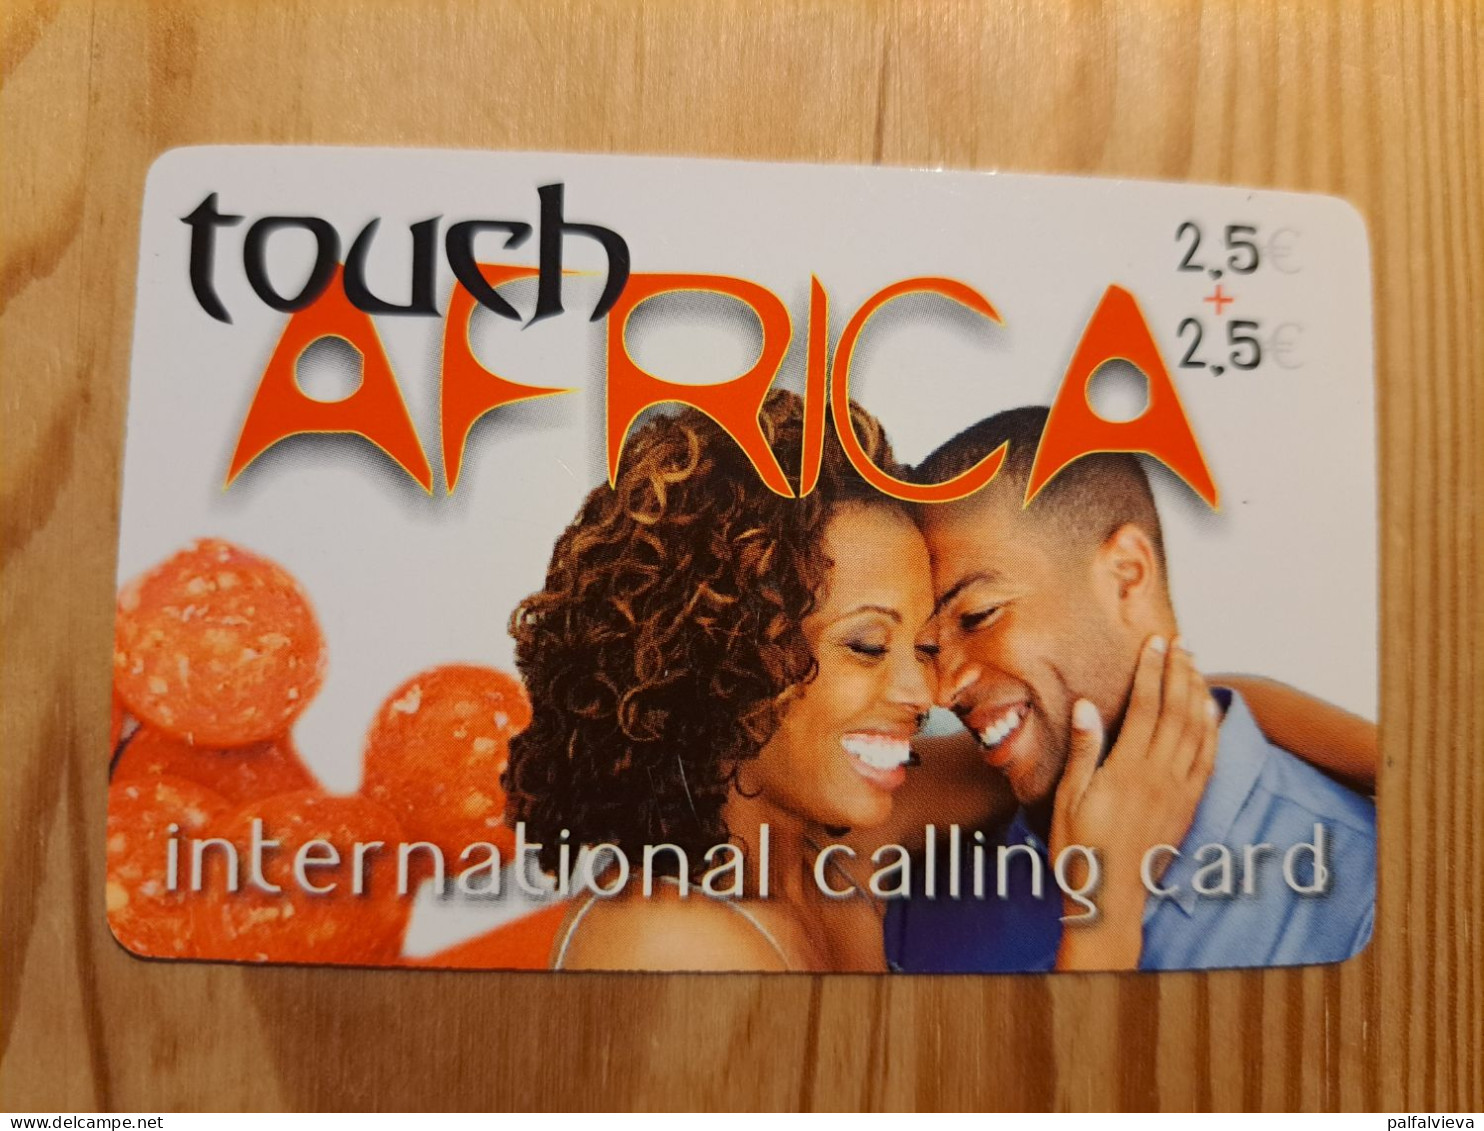 Prepaid Phonecard Germany, Touch Africa - Woman - [2] Mobile Phones, Refills And Prepaid Cards